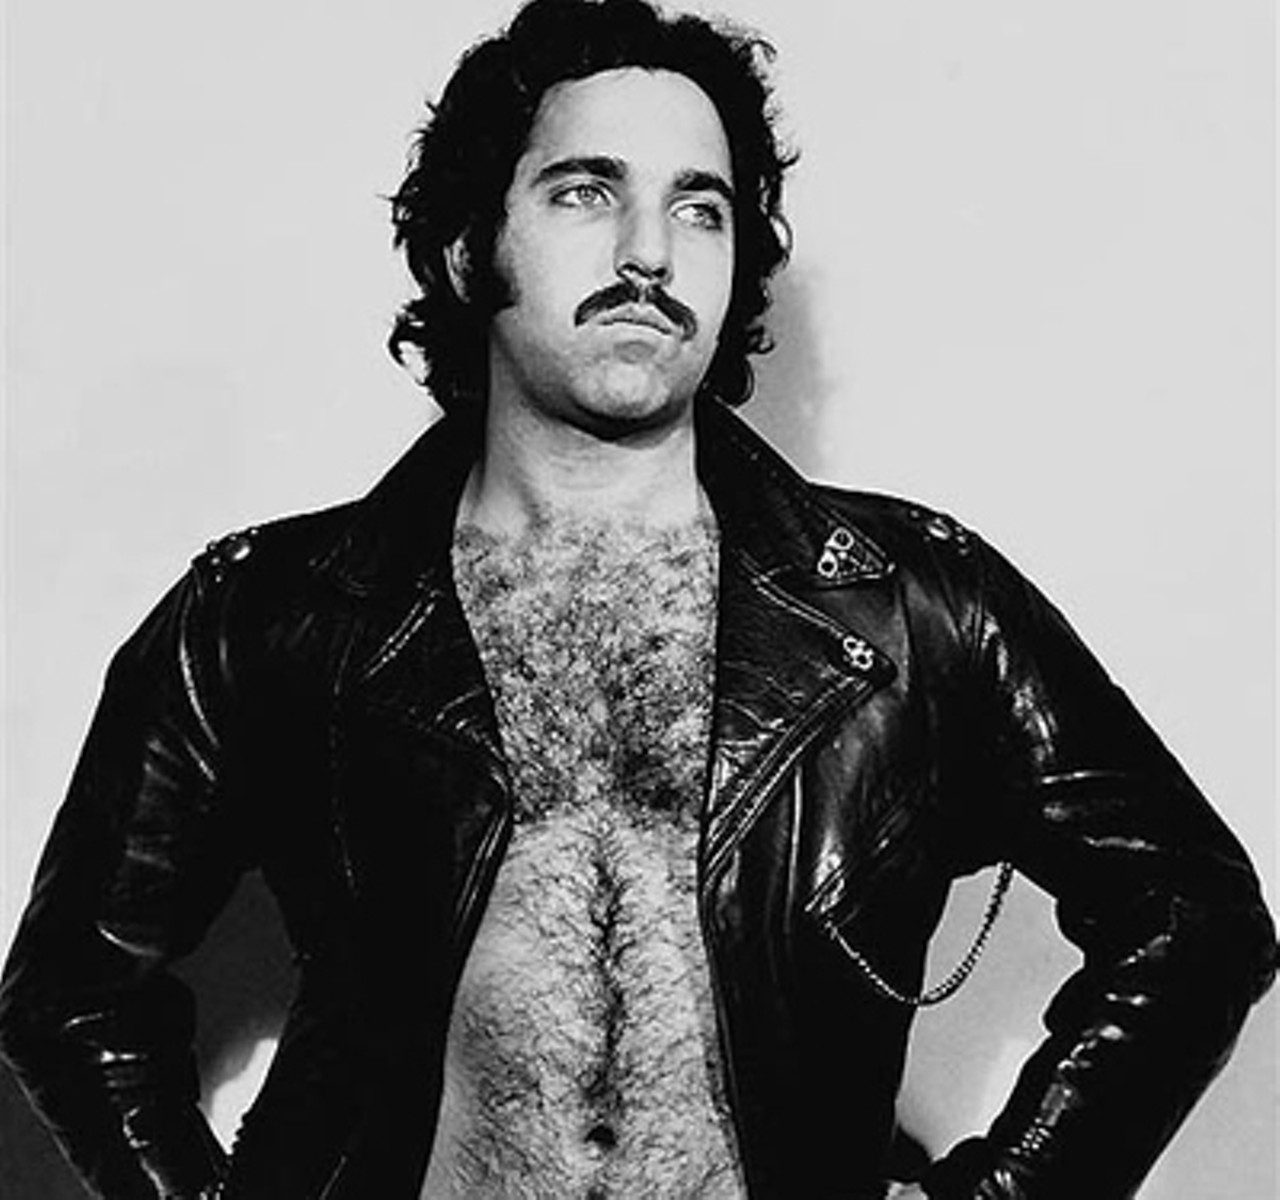 Would ever guess this is Ron Jeremy?